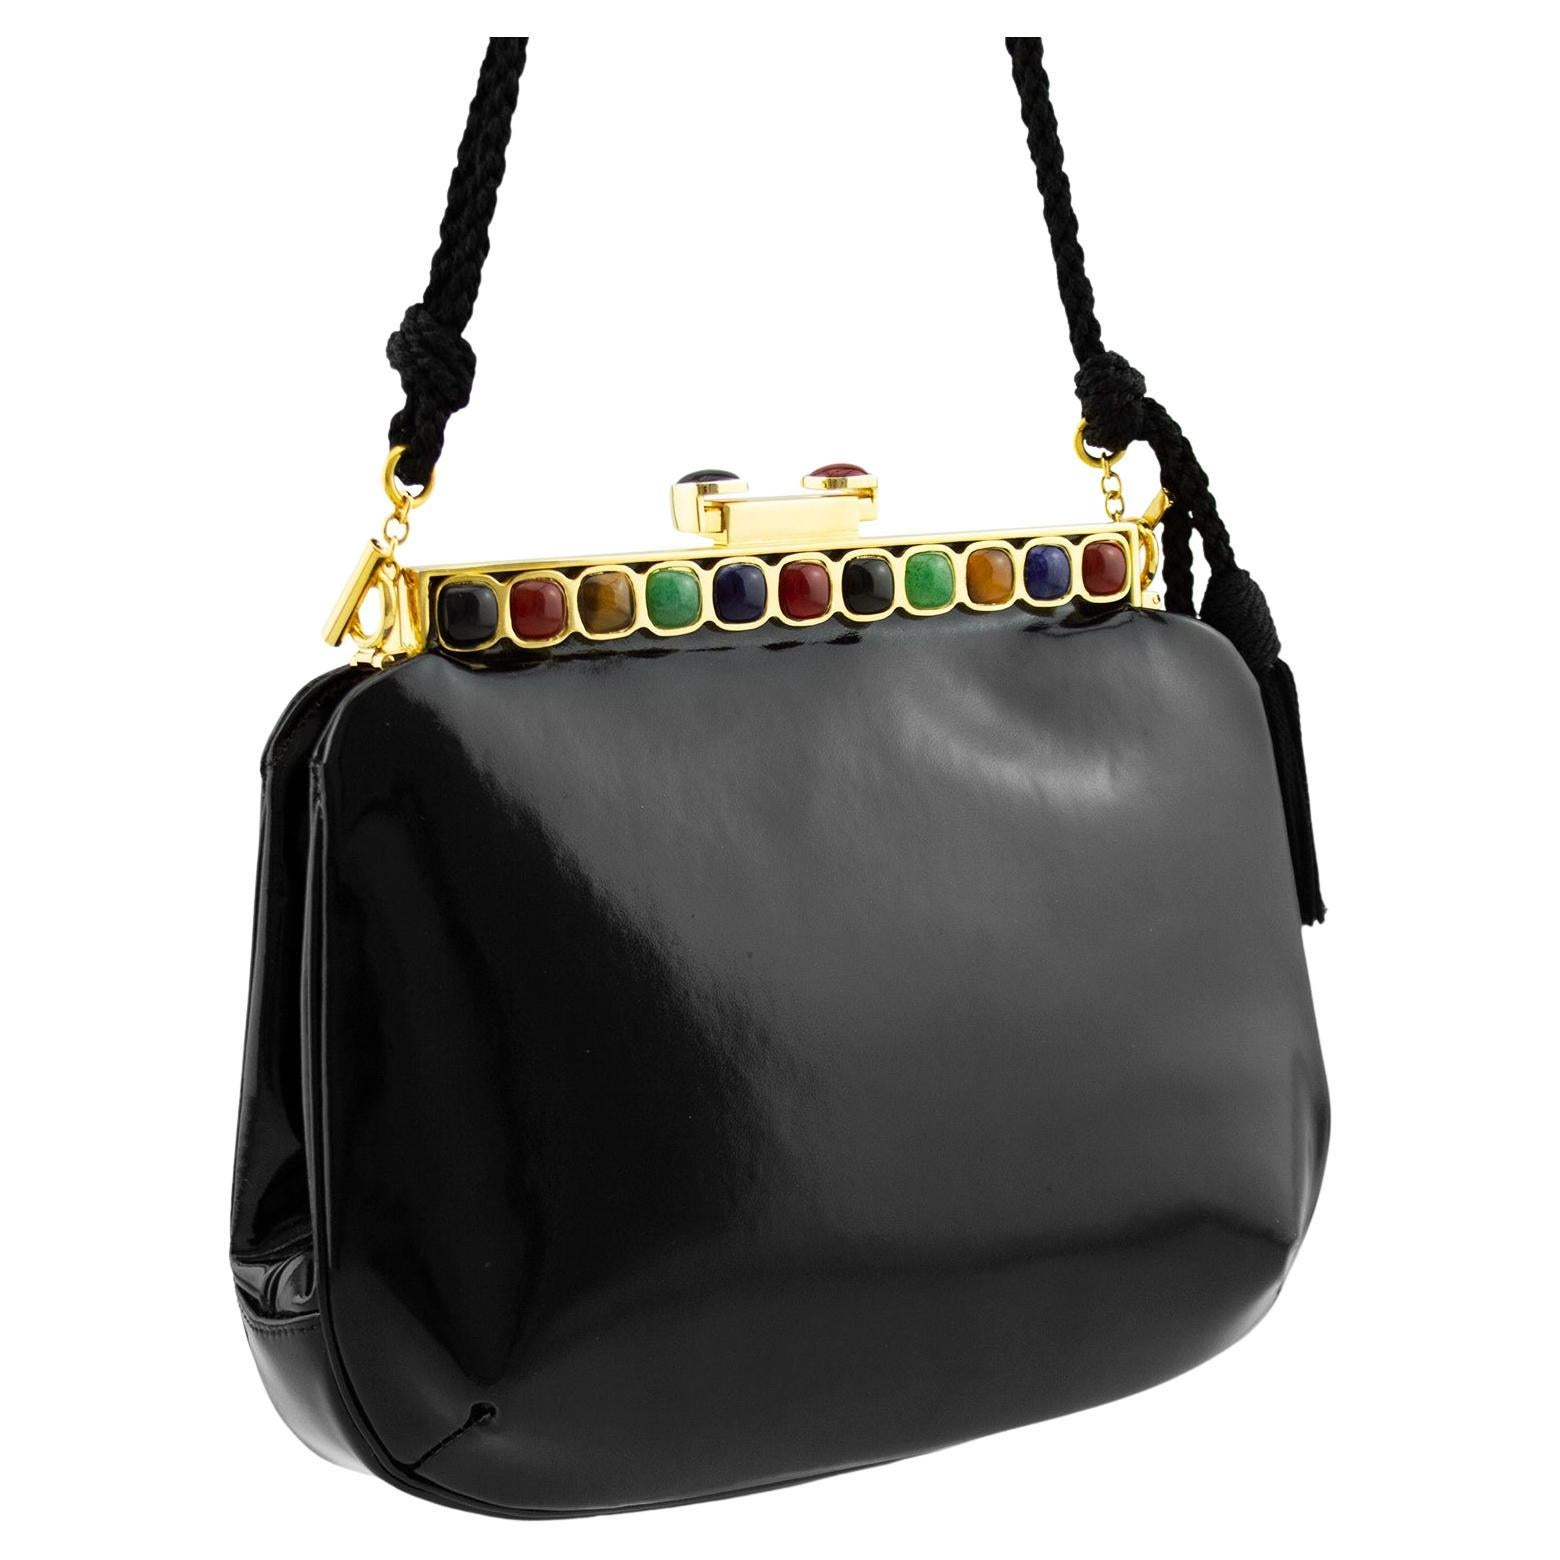 Beautiful Judith Leiber frame style evening bag from the 1980s. Black patent leather with gold tone metal hardware. Frame and sliding clasp are embellished with multi coloured rounded square cabochons. Twisted and knotted long shoulder strap with